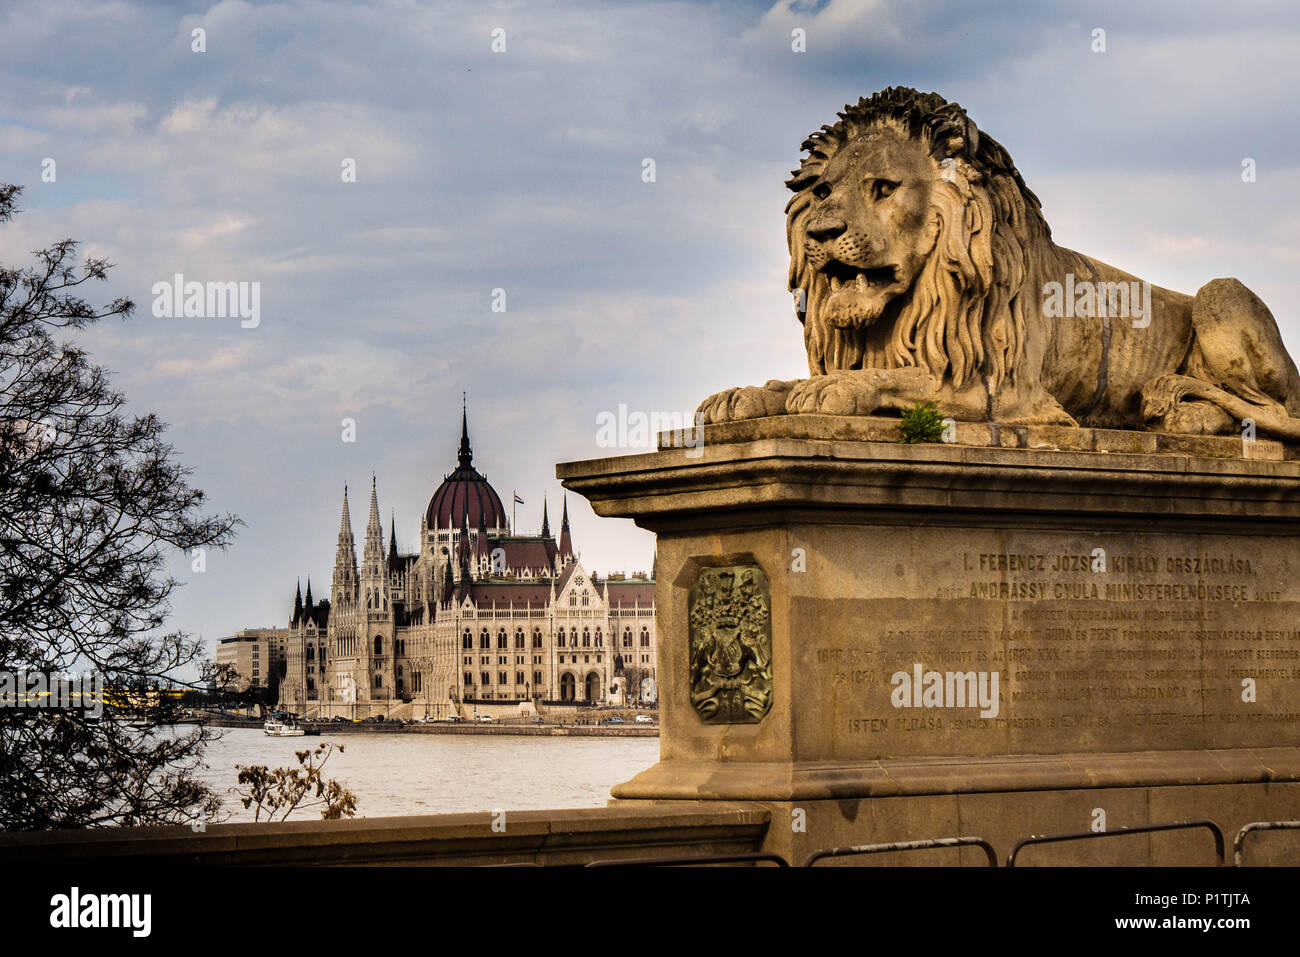 View from the Chain Bridge, guarded by a lion, across the Danube river towards the Parliament of Hungary in Budapest Stock Photo